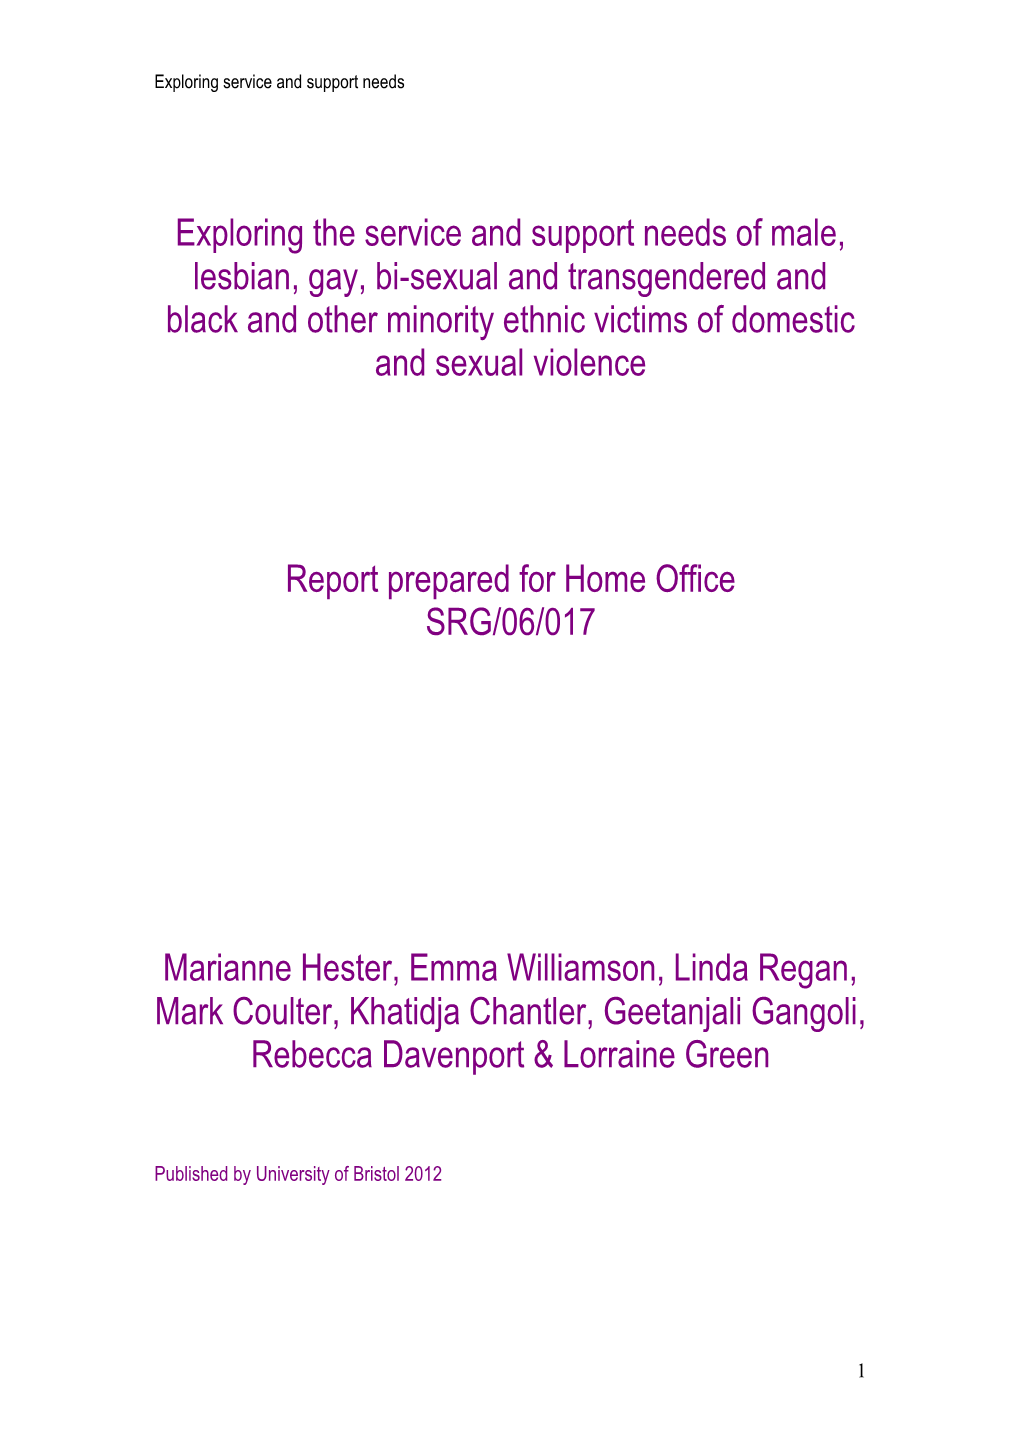 Exploring the Service and Support Needs of Male, Lesbian, Gay, Bi-Sexual and Transgendered and Black and Other Minority Ethnic Victims of Domestic and Sexual Violence